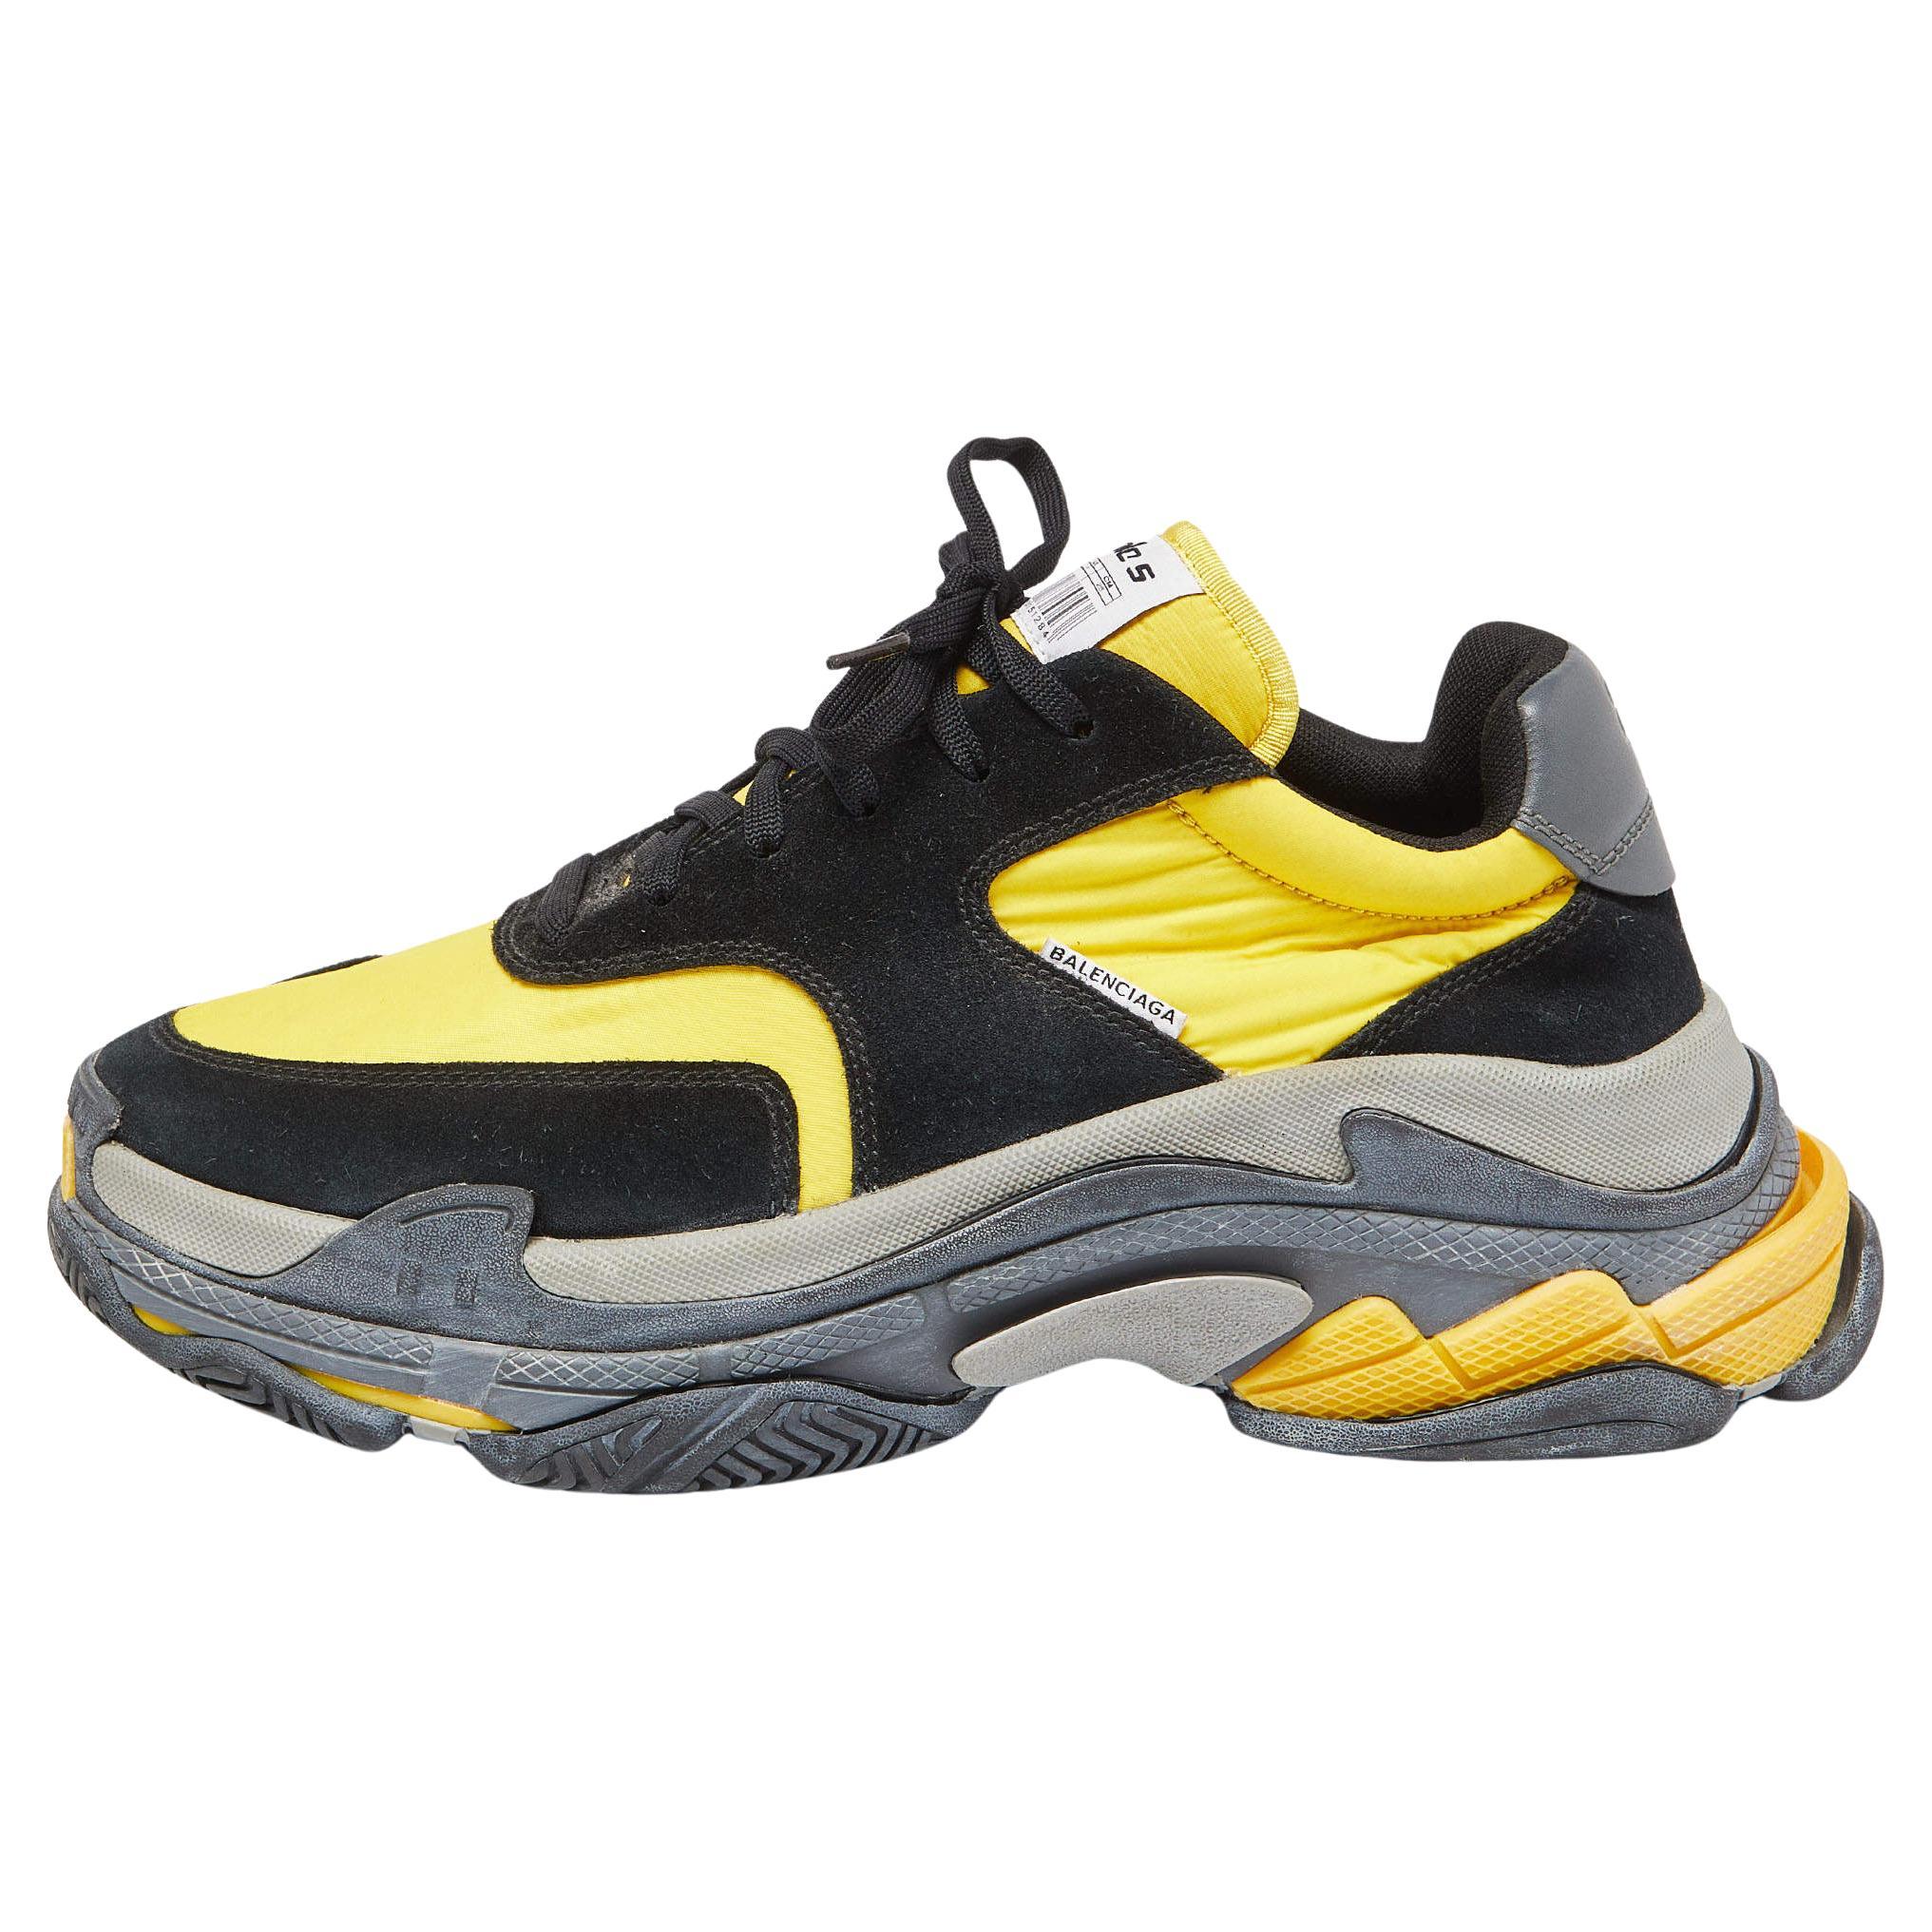 Balenciaga Black/Yellow Suede and Nylon Triple S Sneakers Size 44 For Sale